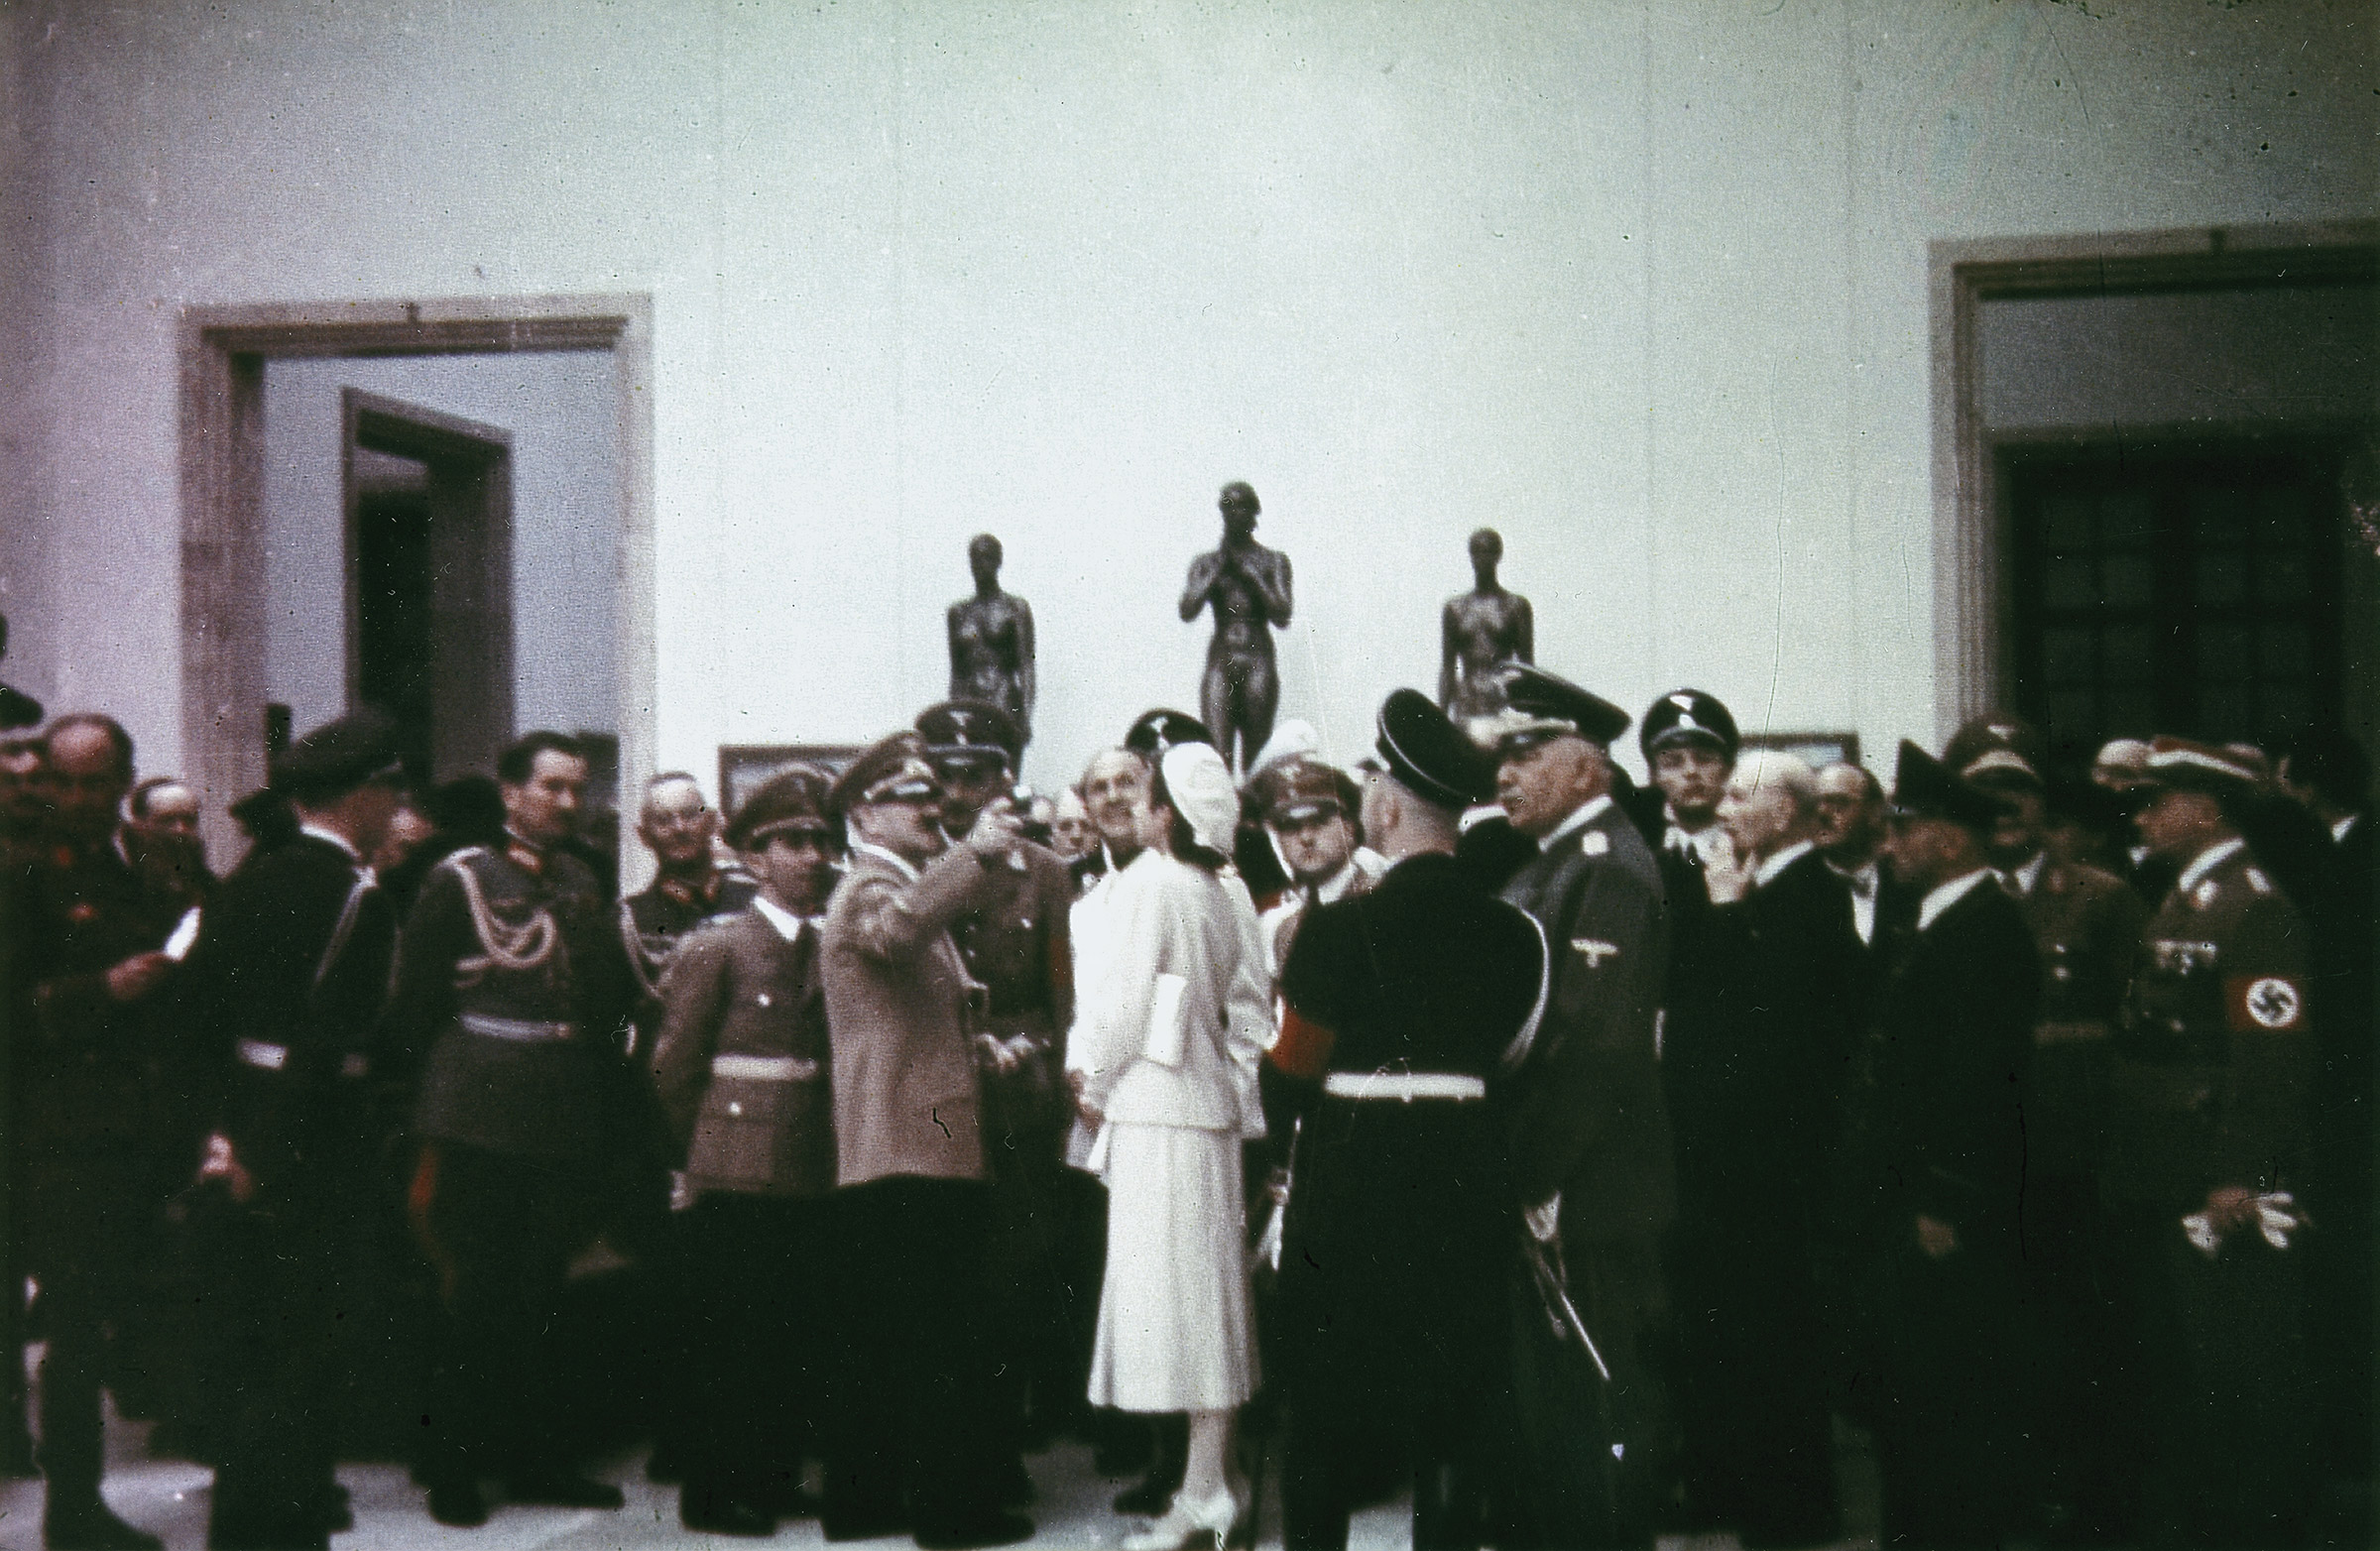 Photograph by Heinrich Hoffmann of Gerdy Troost speaking with Hitler and surrounded by a crowd of Nazi bigwigs at the House of German Art in Munich on the Day of German Art, July 16, 1939. Those pictured (from left to right): Eugen von Schobert, Joseph Goebbels, Adolf Hitler, Dino Alfieri, Gerdy Troost, Heinrich Himmler (back turned), Konstantin von Neurath.